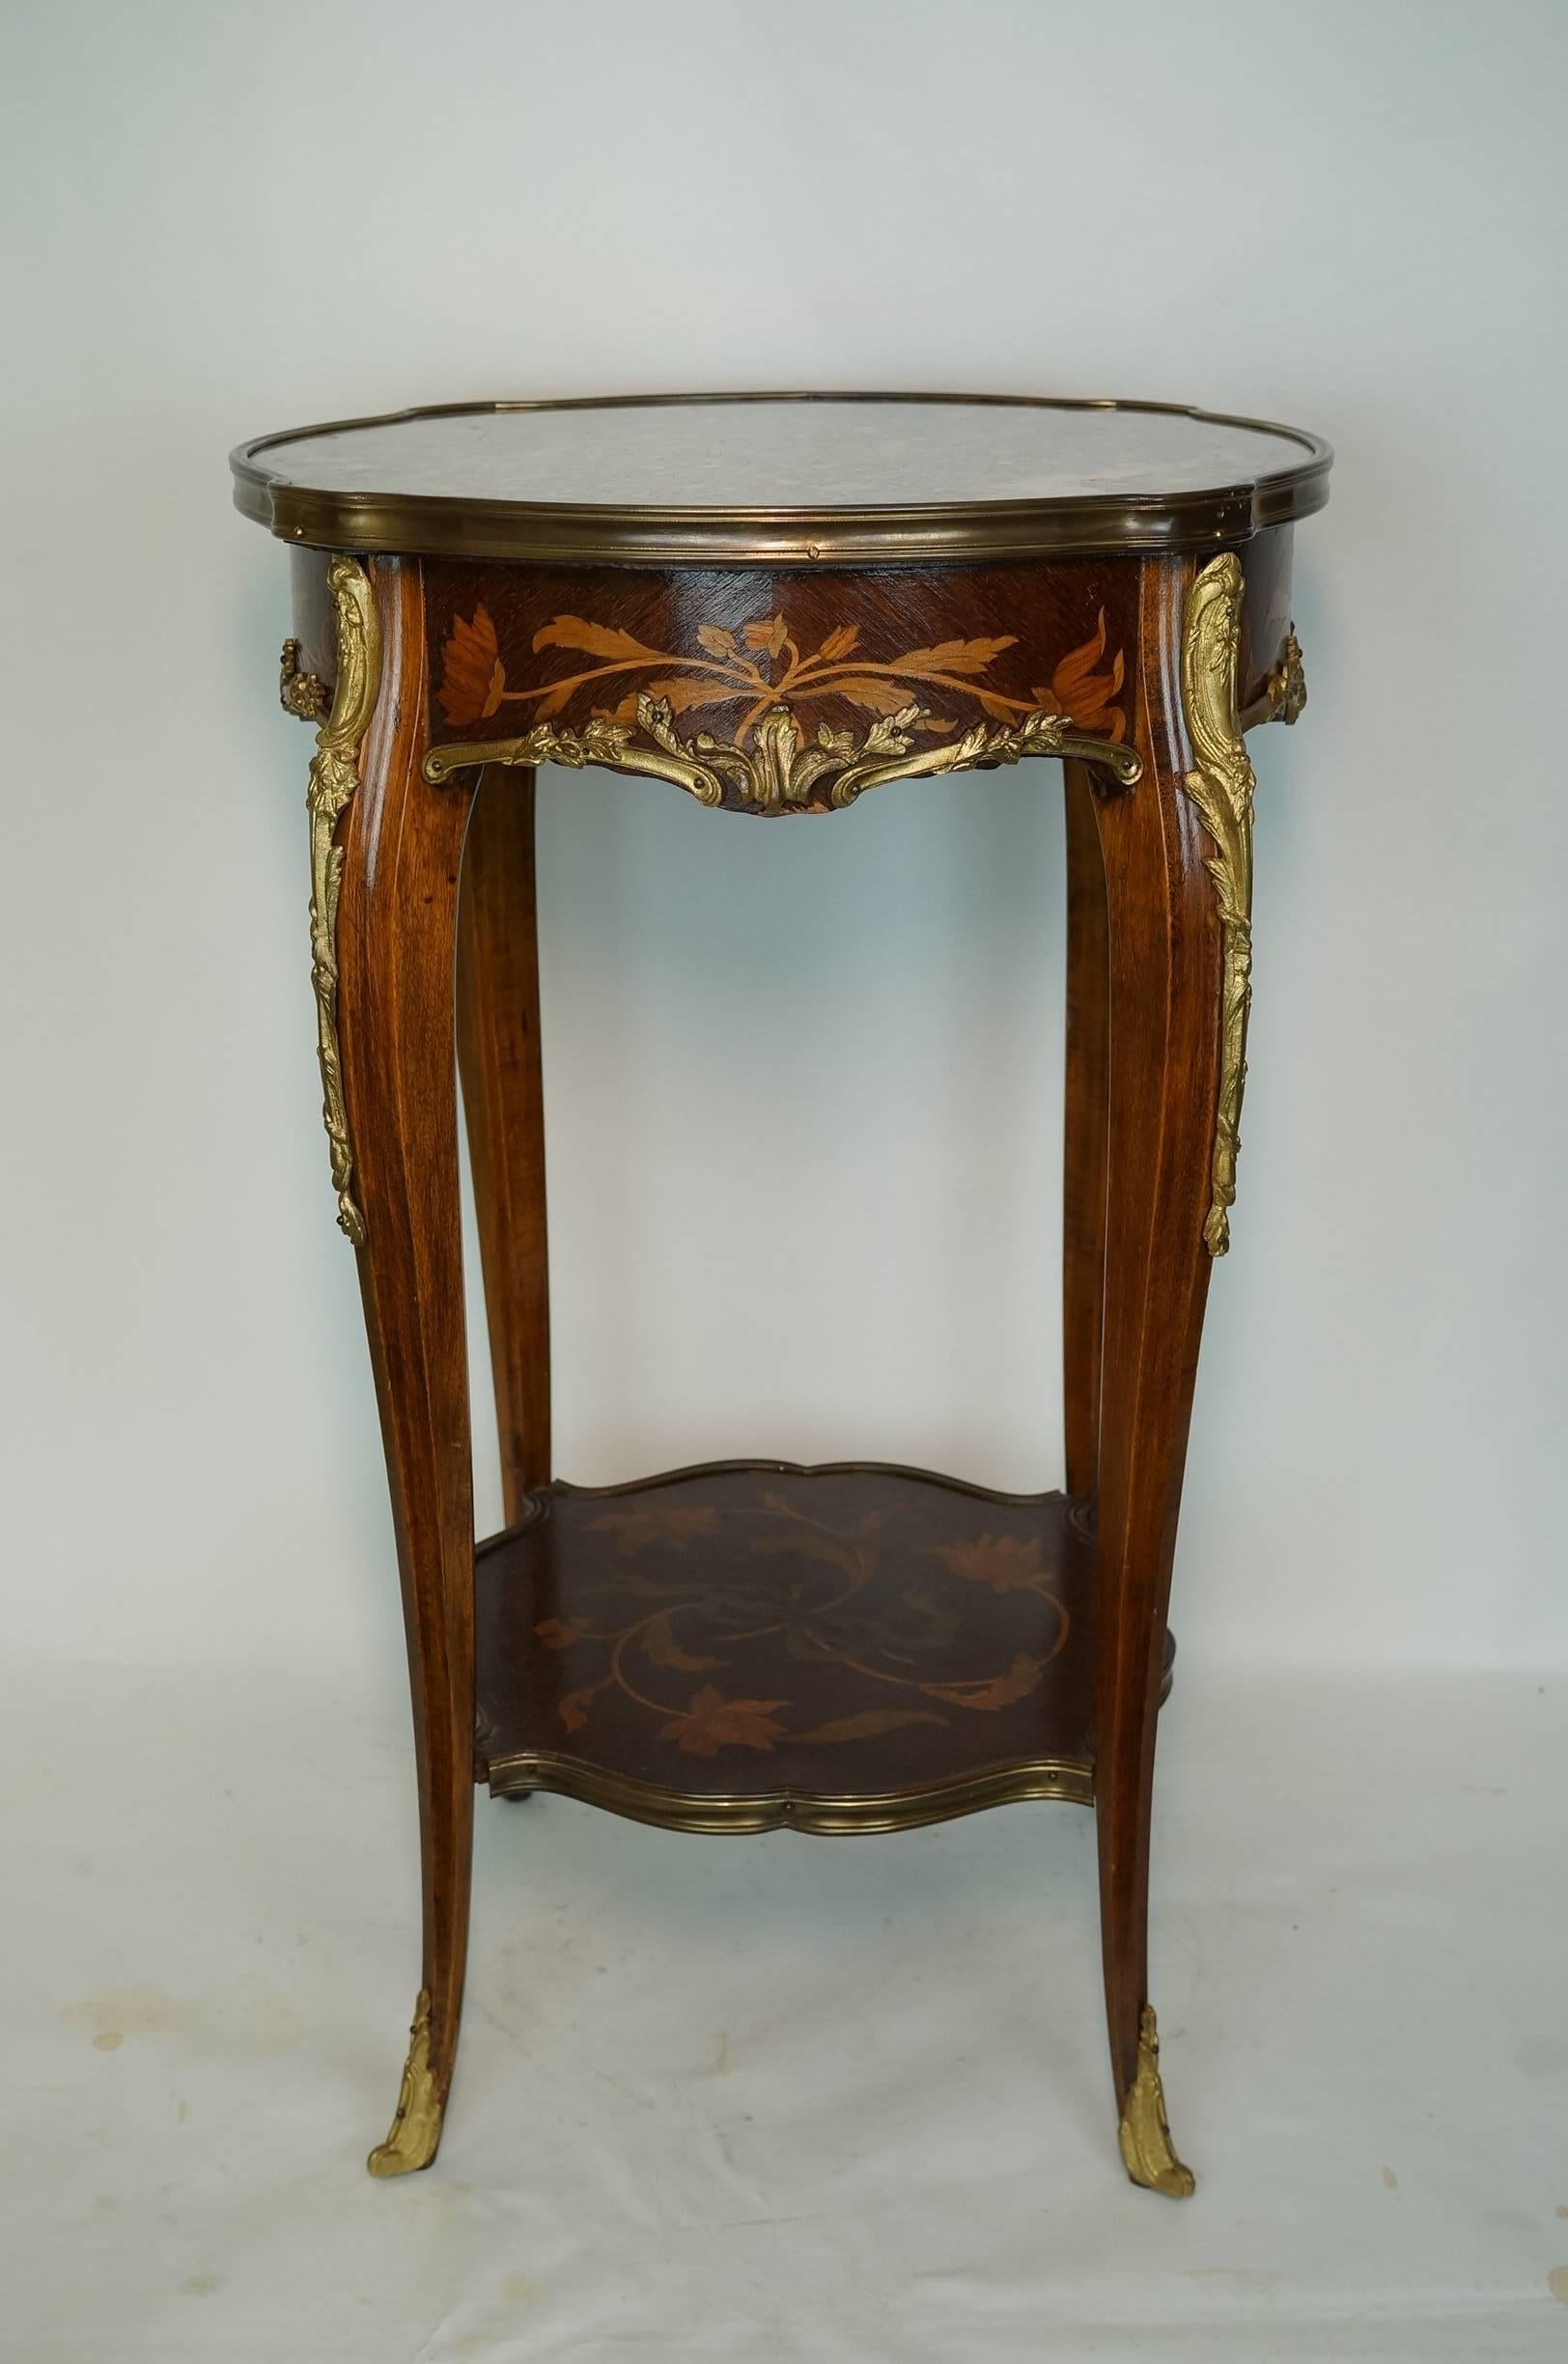 Wonderful pair of 19 century  French  Louis XV style bronze mounted   Marquetry Inlaid Side Tables with marble top.